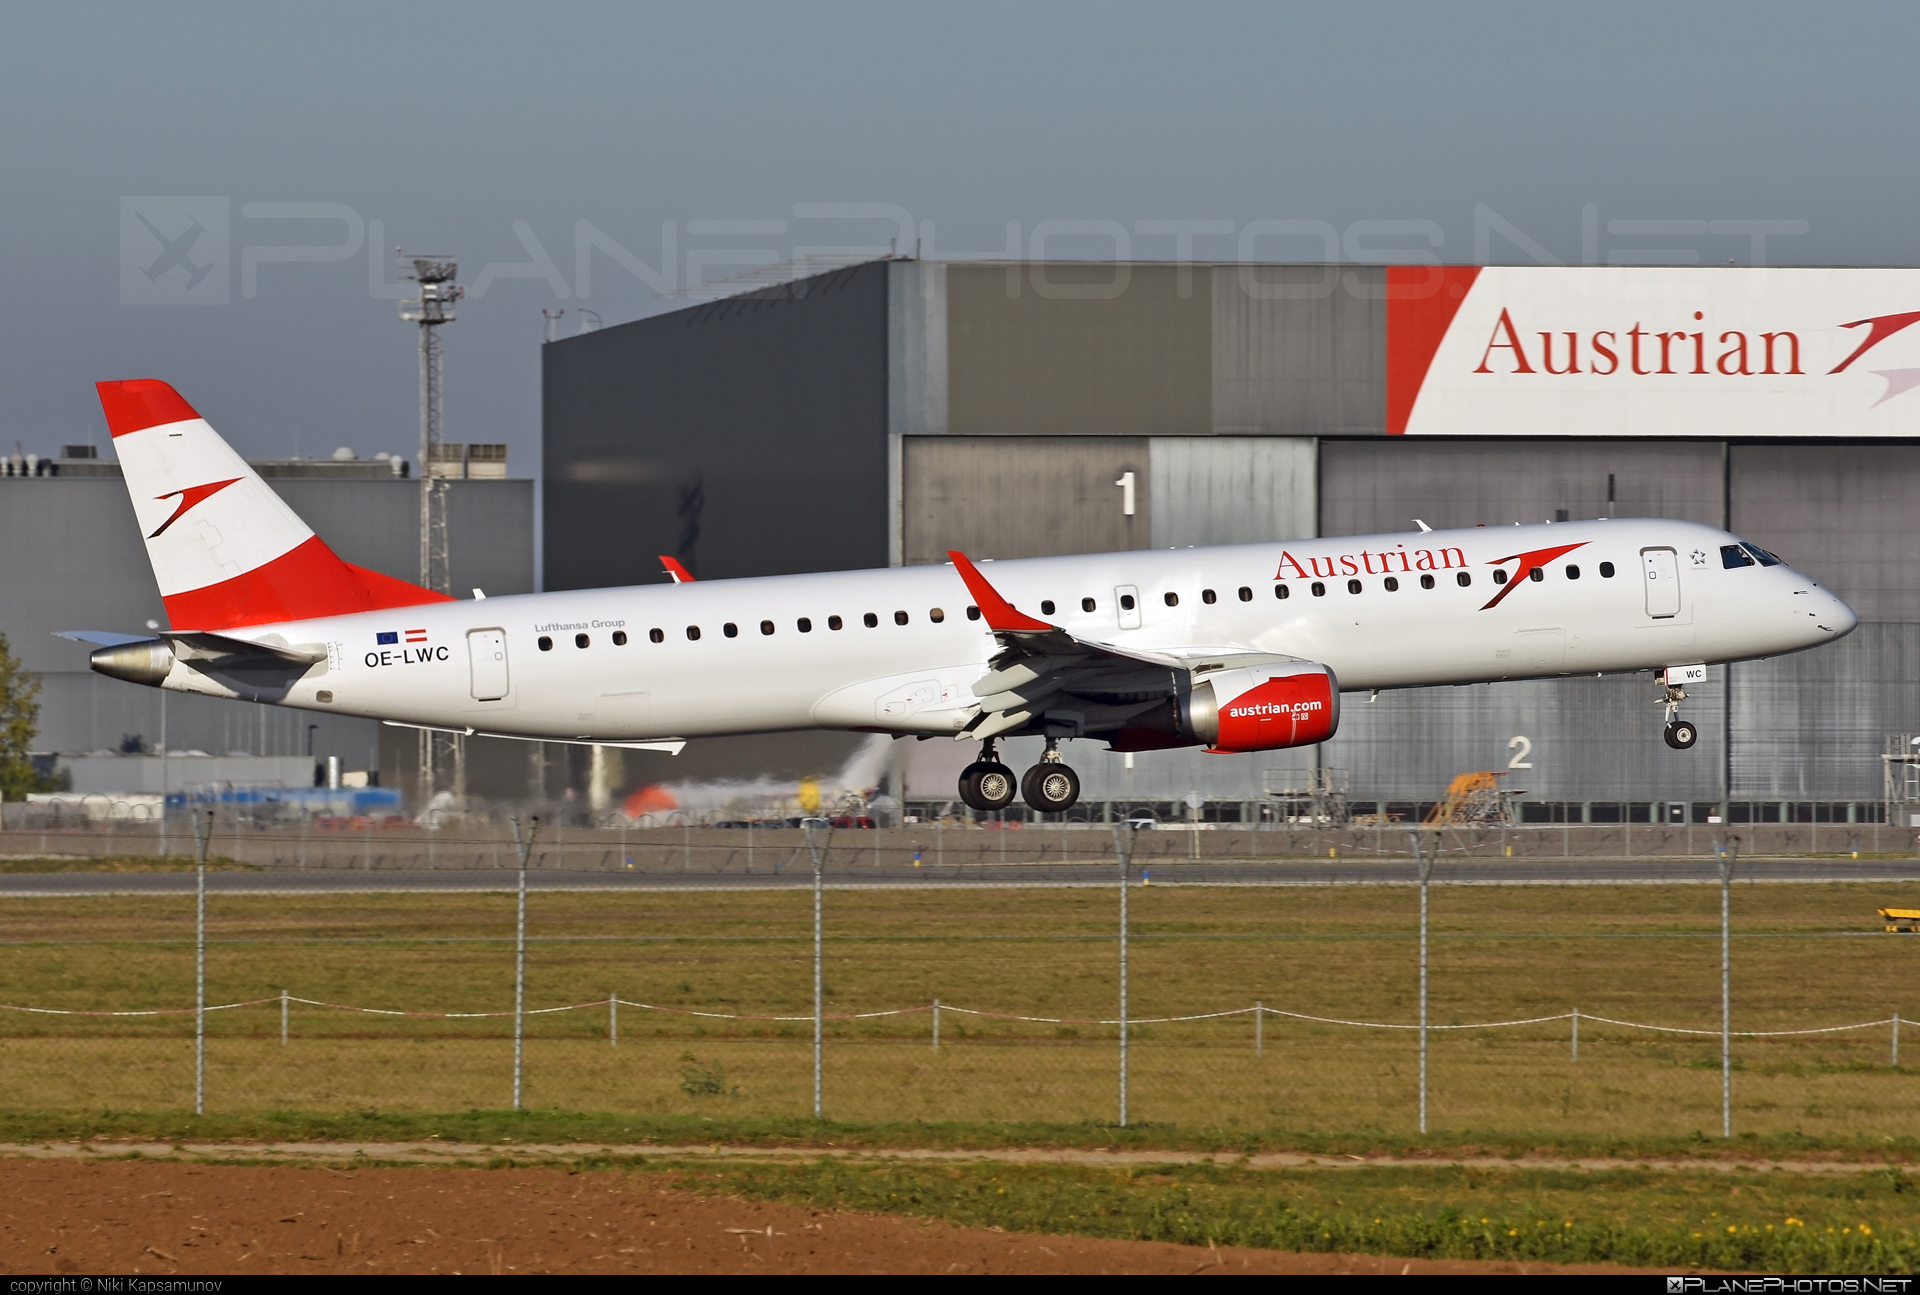 Embraer E195LR (ERJ-190-200LR) - OE-LWC operated by Austrian Airlines #austrian #austrianAirlines #e190 #e190200 #e190200lr #e195lr #embraer #embraer190200lr #embraer195 #embraer195lr